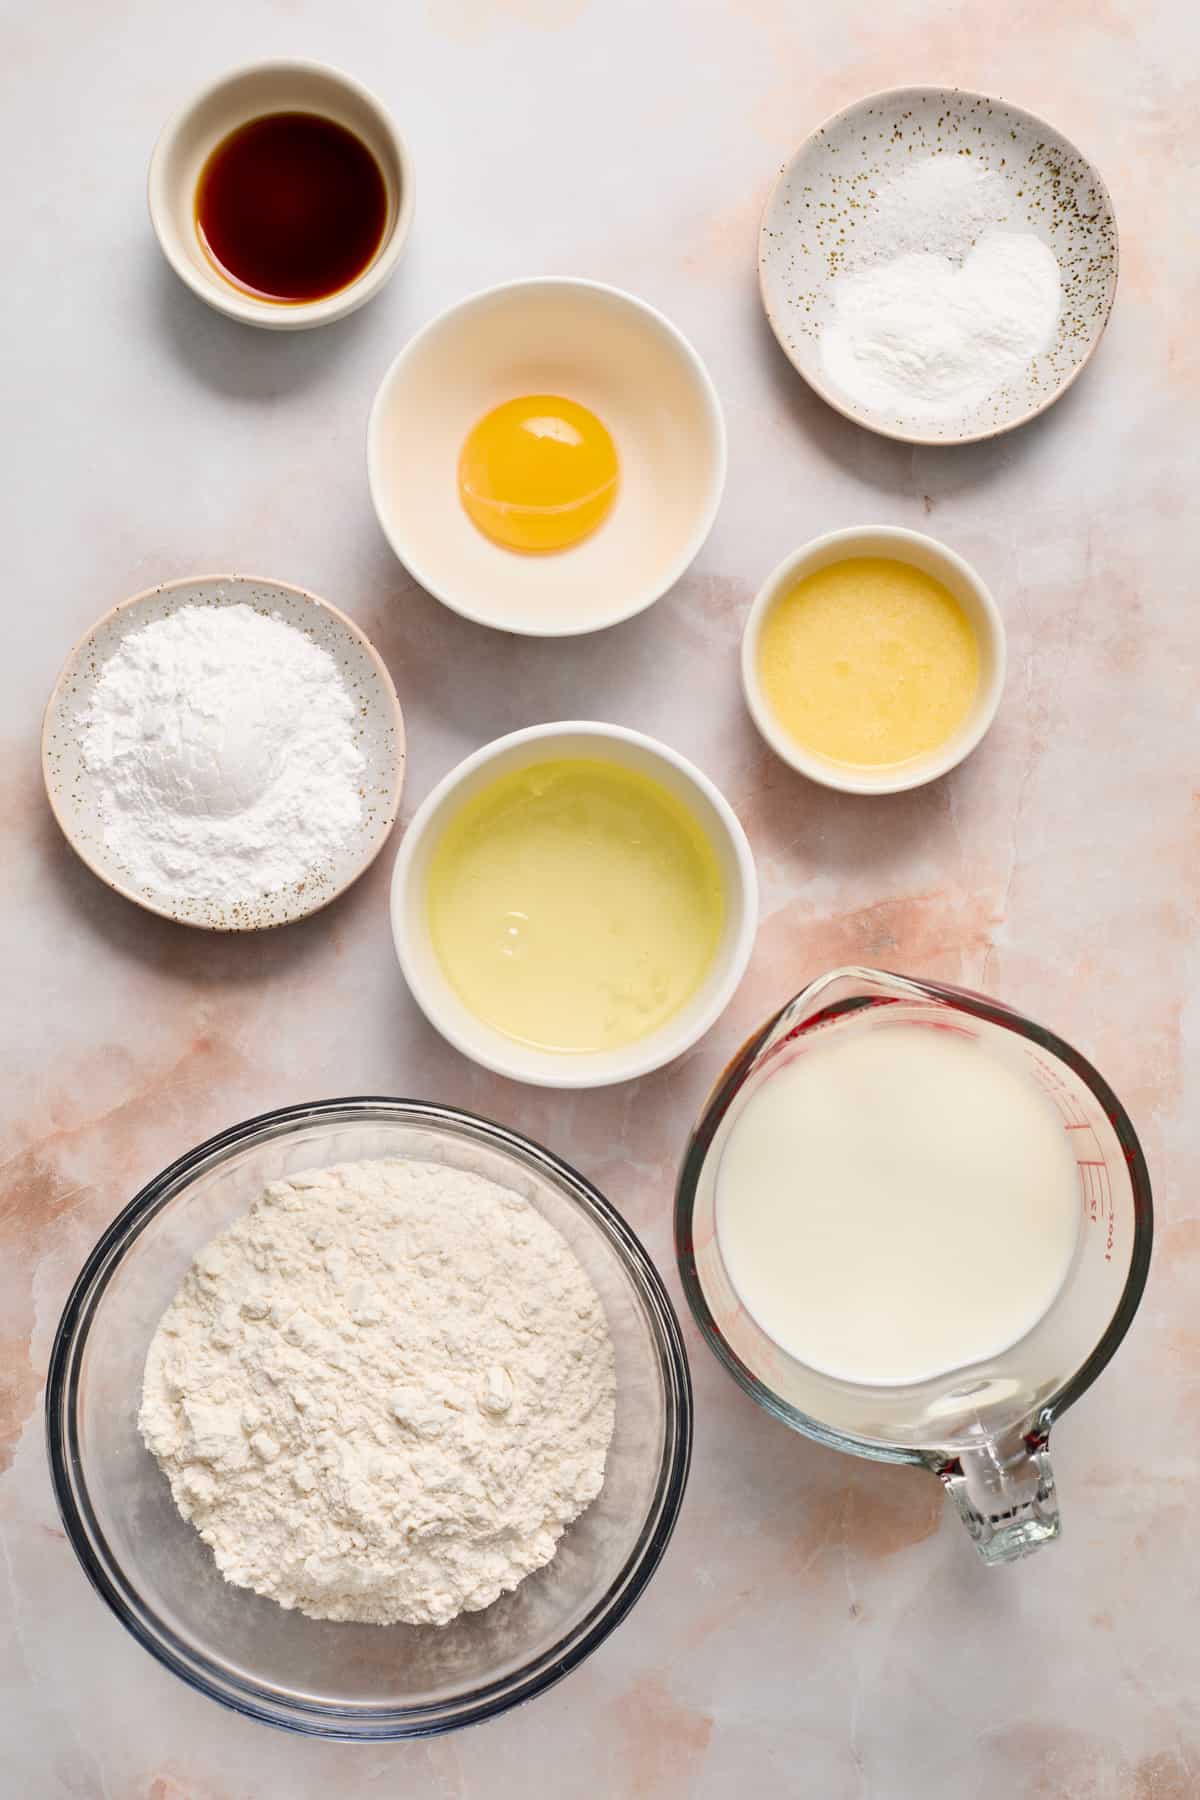 Flour, milk, eggs, vanilla and other ingredients to arranged on surface.